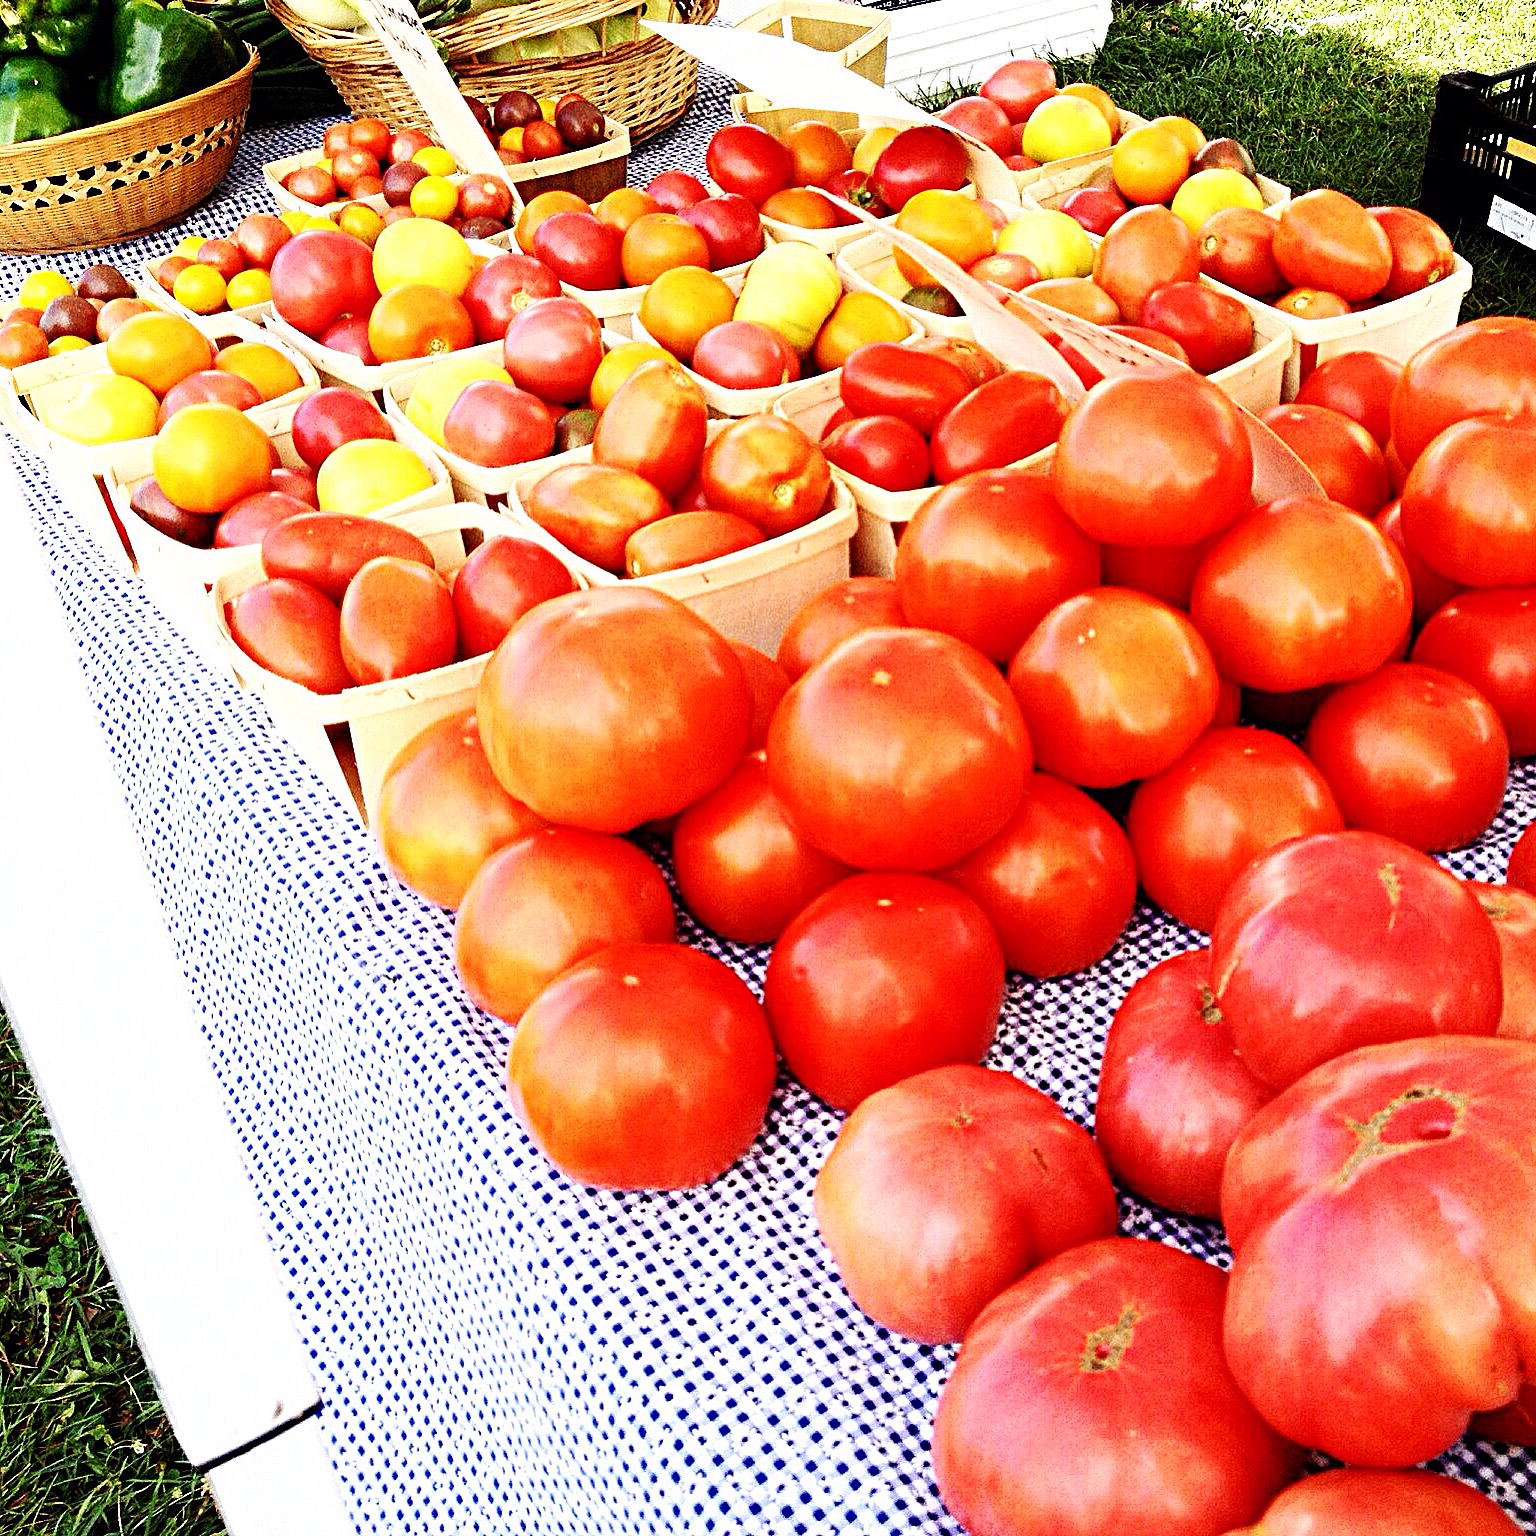 baskets of ripe tomatoes fill a table at the farmers market